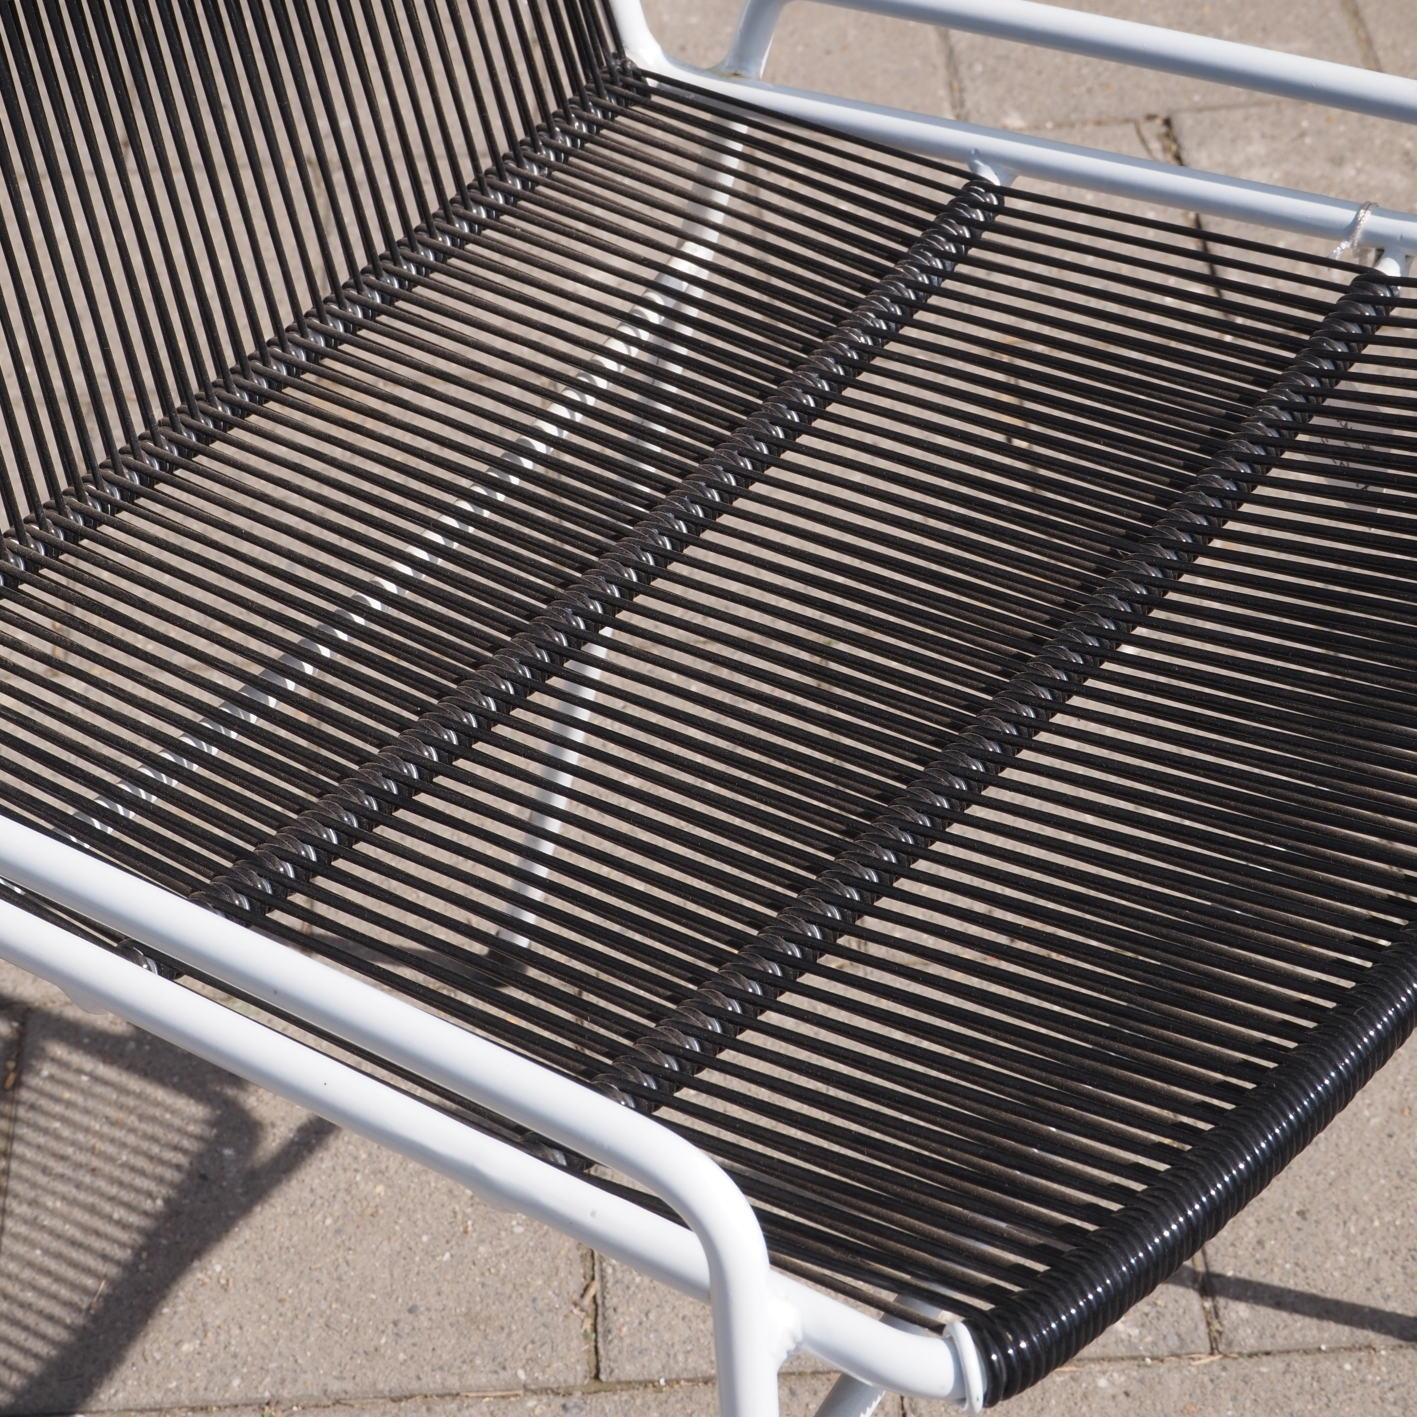 Exterior chair 'Abaco' by Paola Navone for Serax - White/Black